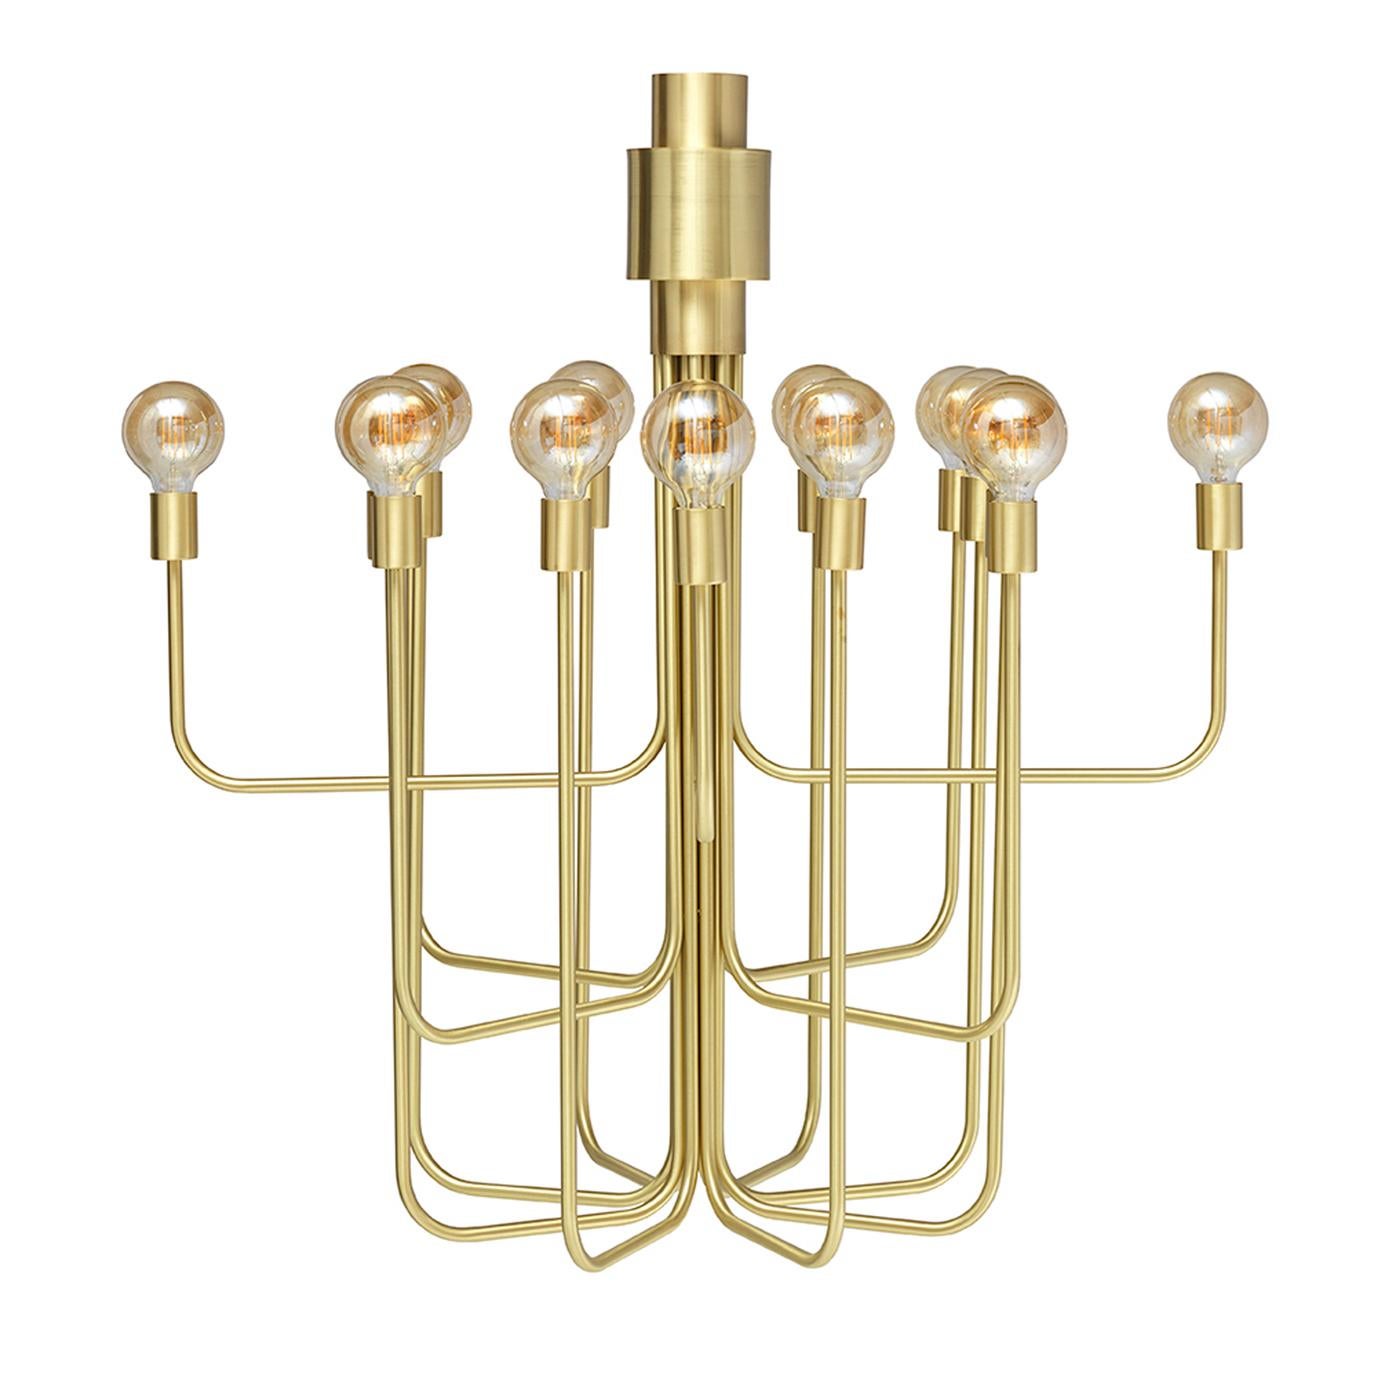 Crafted in brass with a satin finish, the blow up chandelier sets the tone in a chic, contemporary dining space. With 16-light sources, the chandelier provides ample illumination while exuding a quirky cool vibe with retro inspiration. Complete the